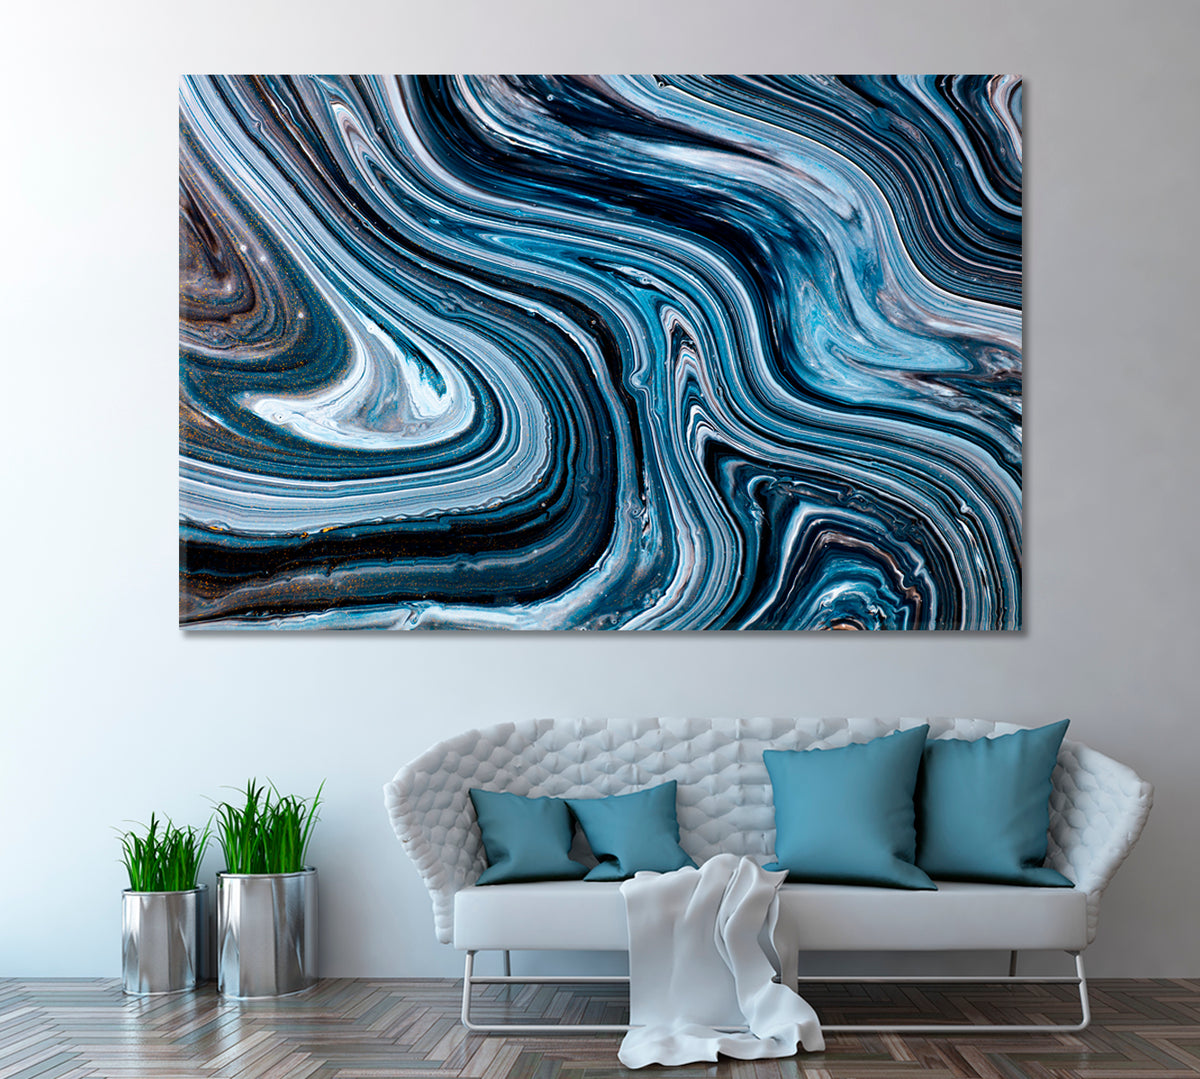 Abstract Blue Fluid Acrylic Pattern Canvas Print ArtLexy 1 Panel 24"x16" inches 